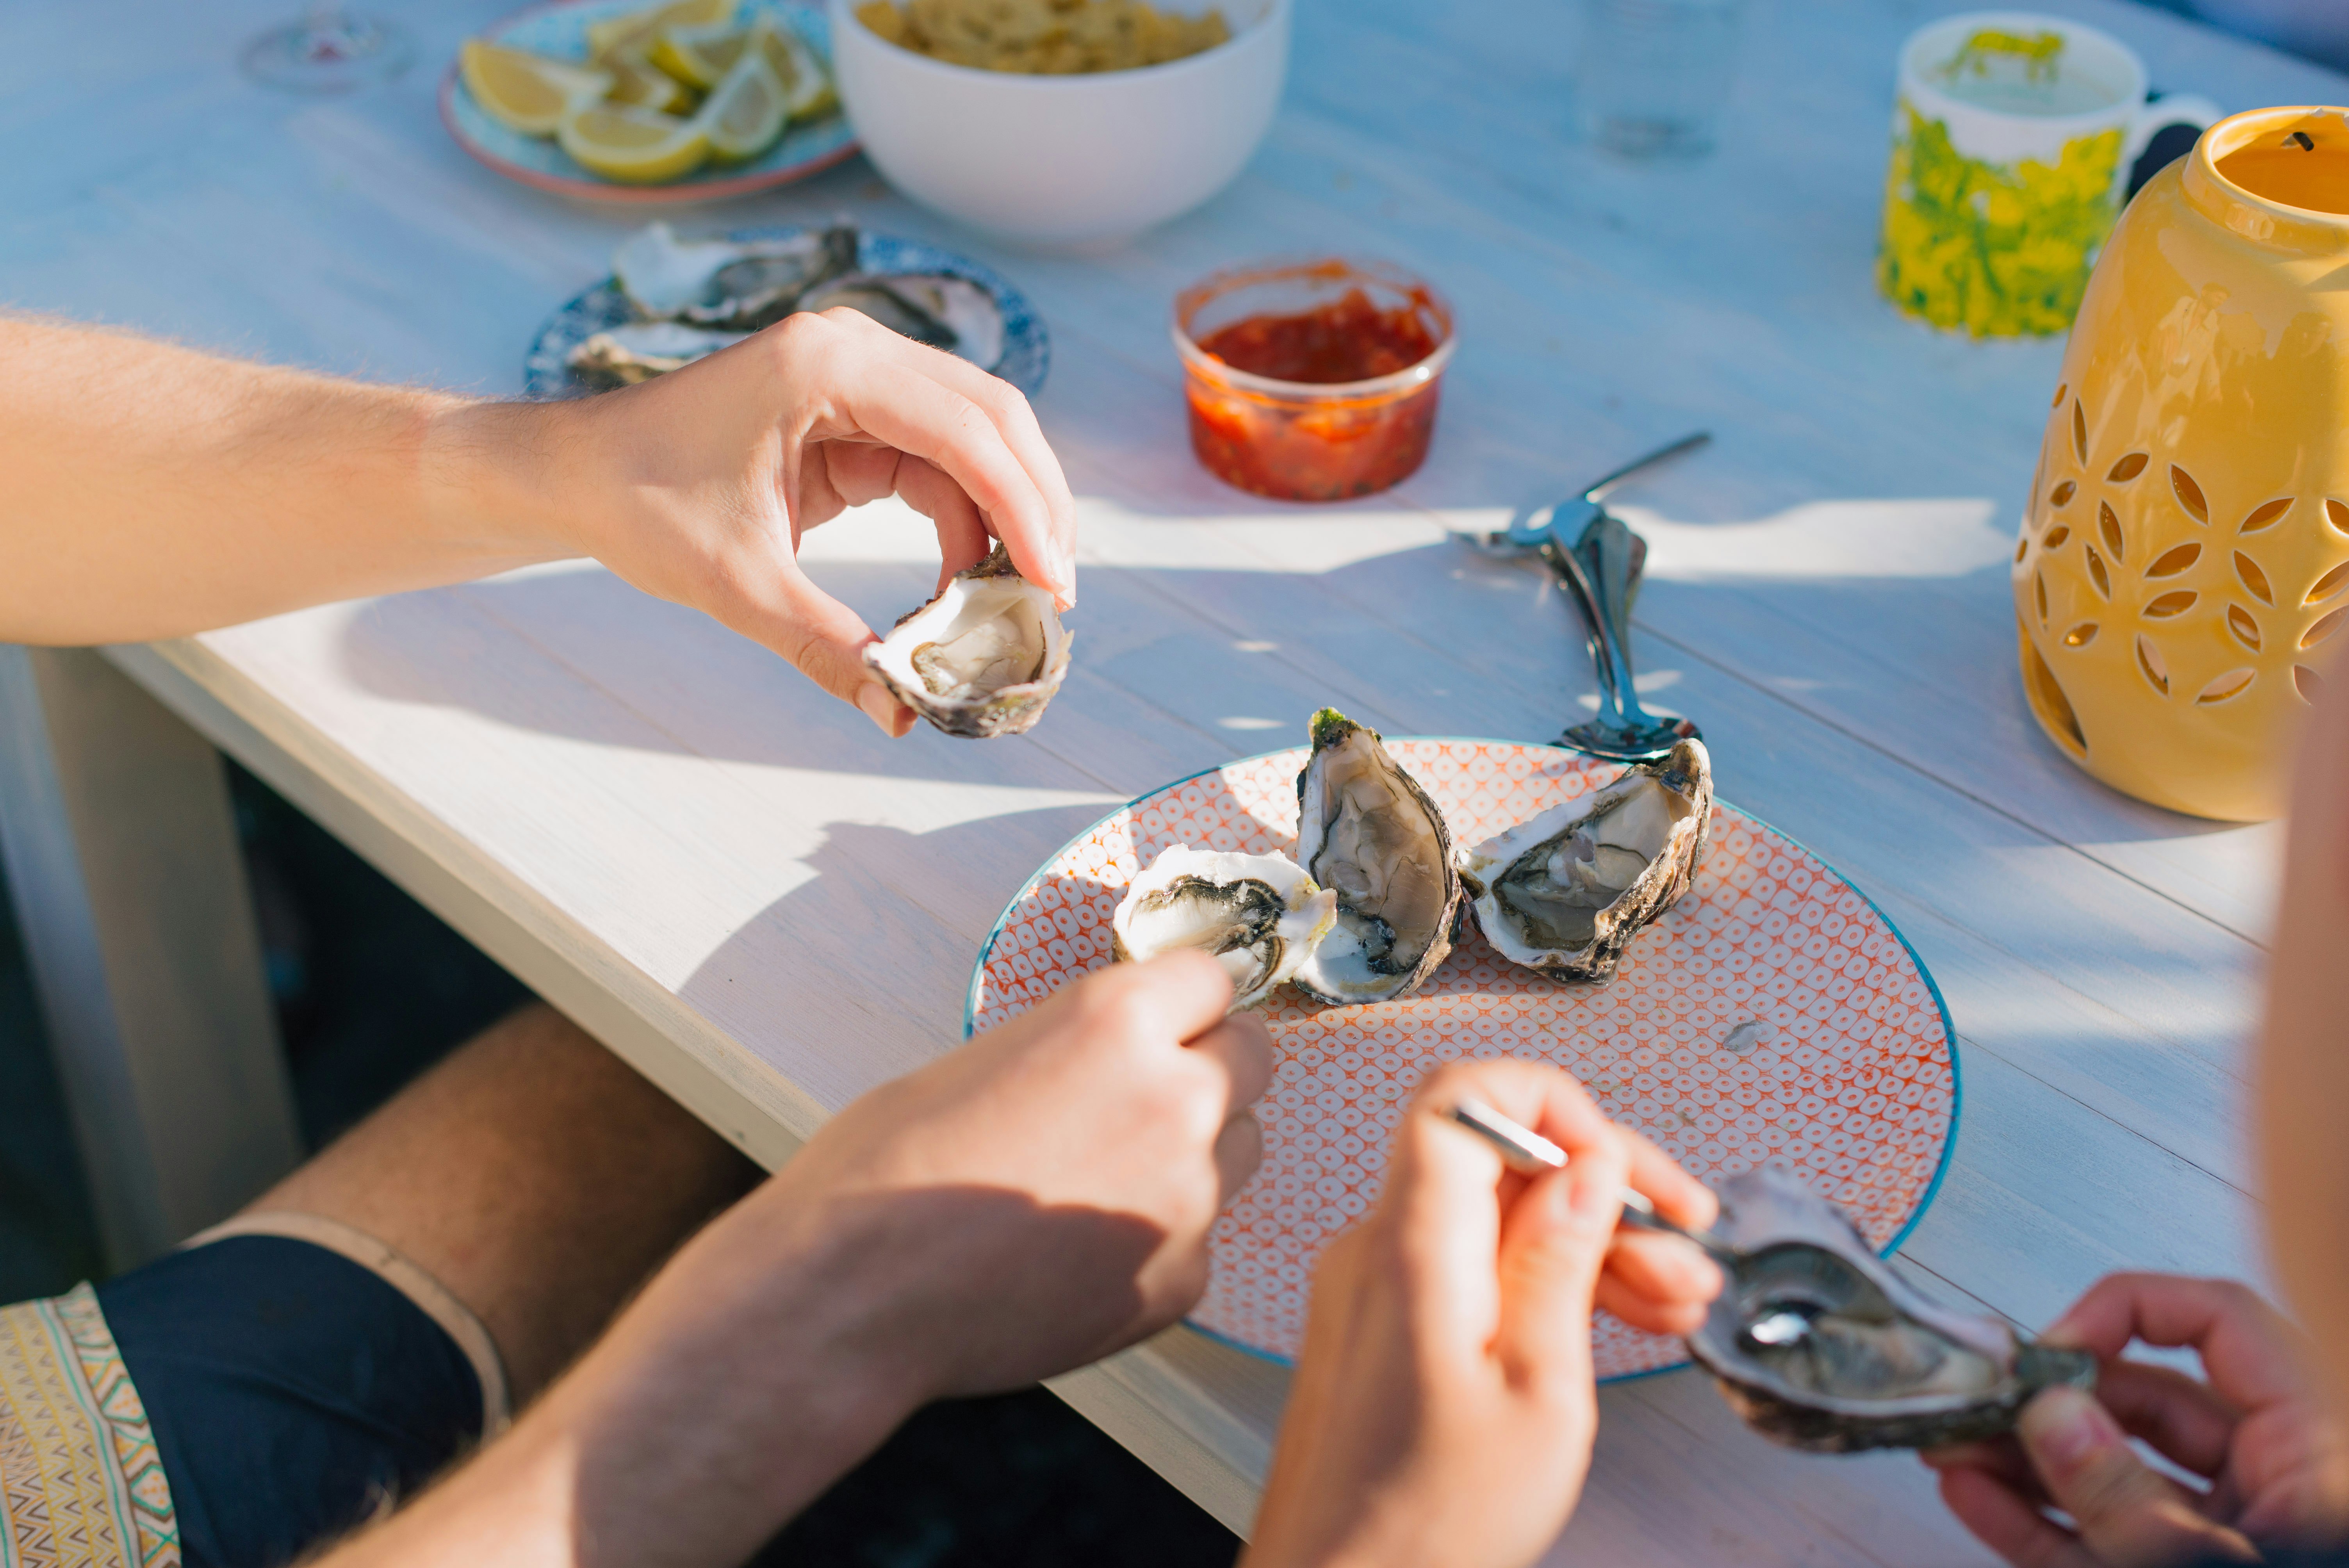 person holding a silver fish on a table